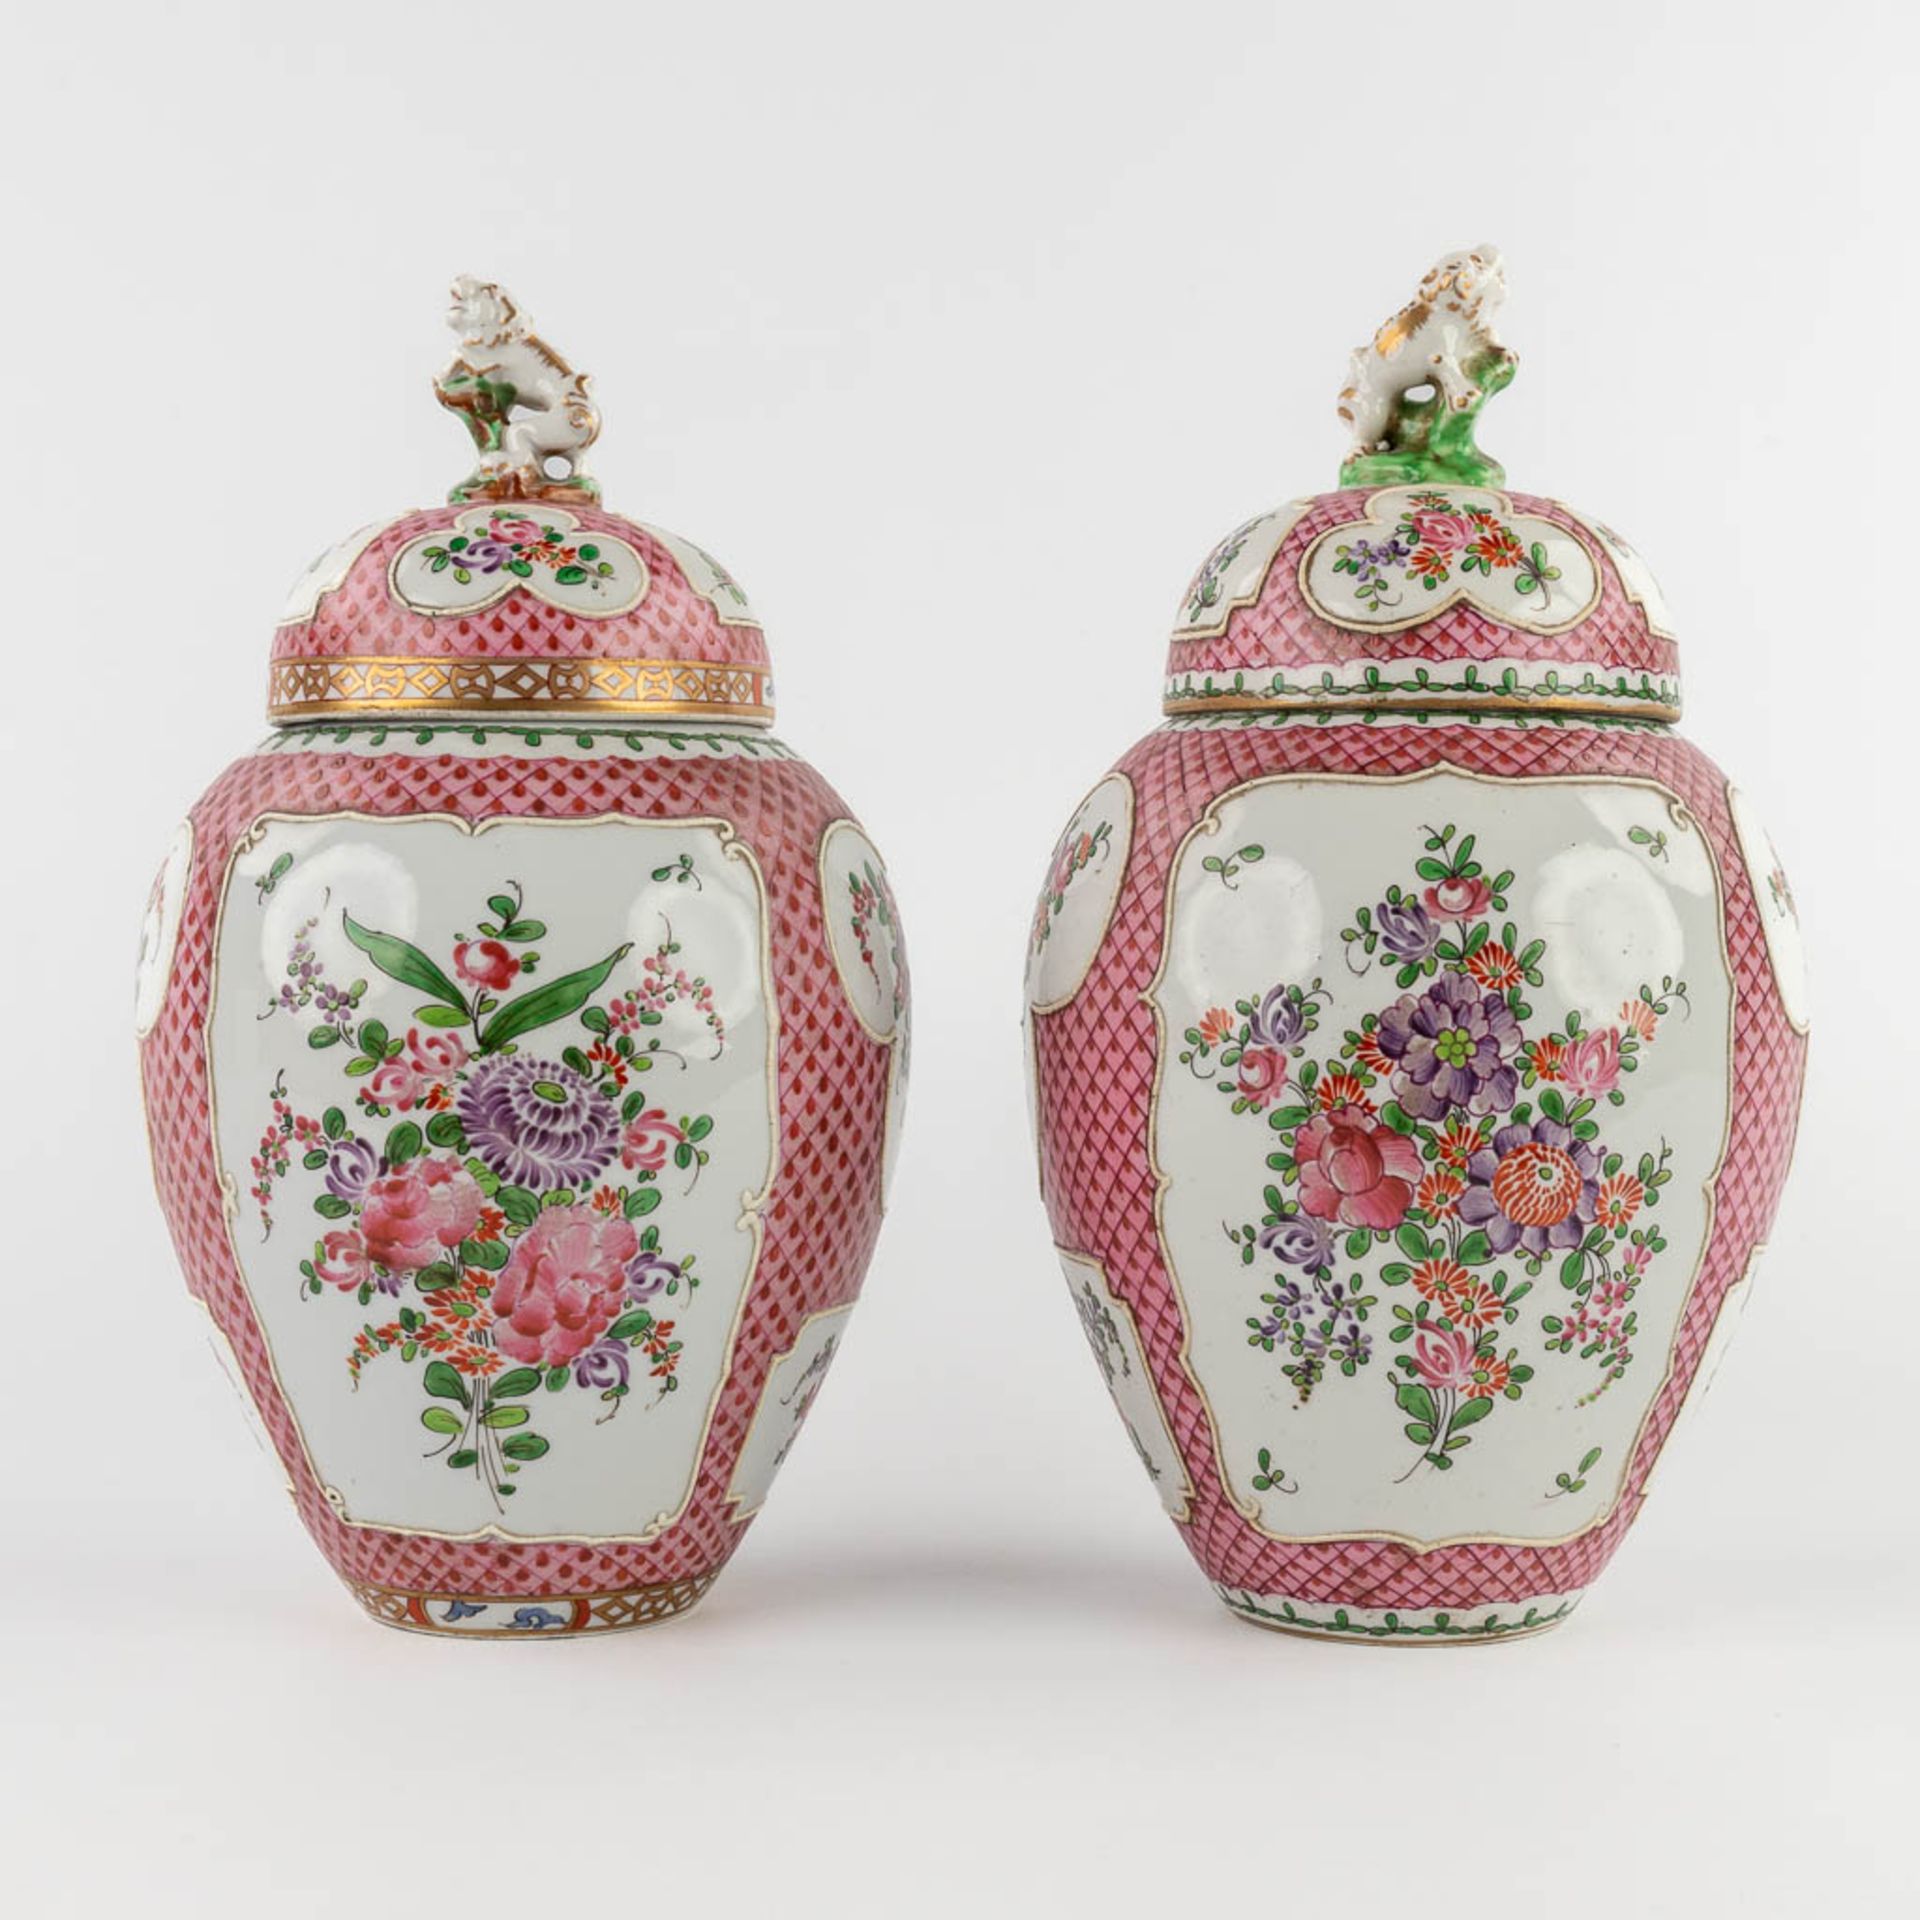 Samson, a pair of Oriental inspired vases with a hand-painted flower decor. (H:27 x D:15 cm) - Image 11 of 16